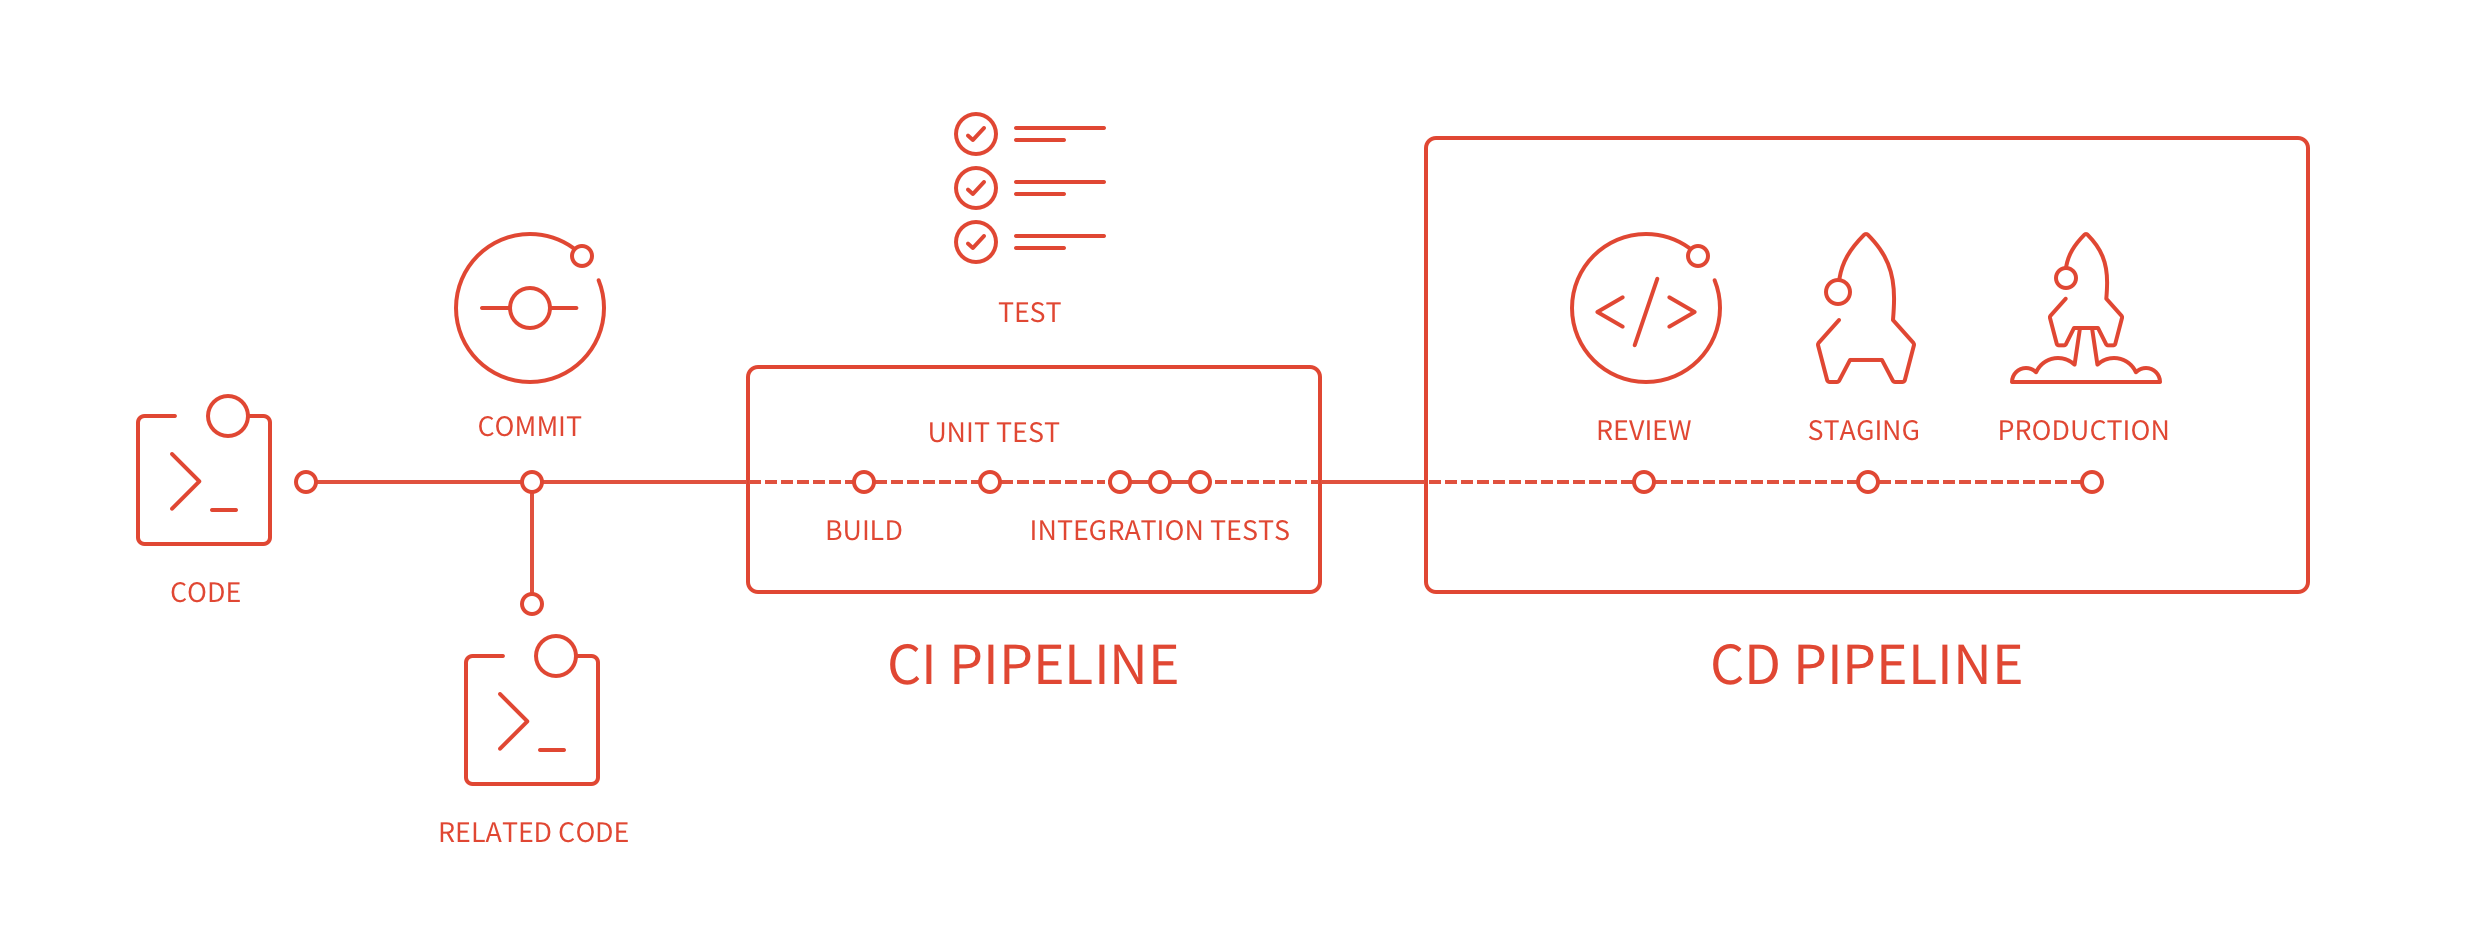 code, commit, related code, ci pipeline, test, cd pipeline